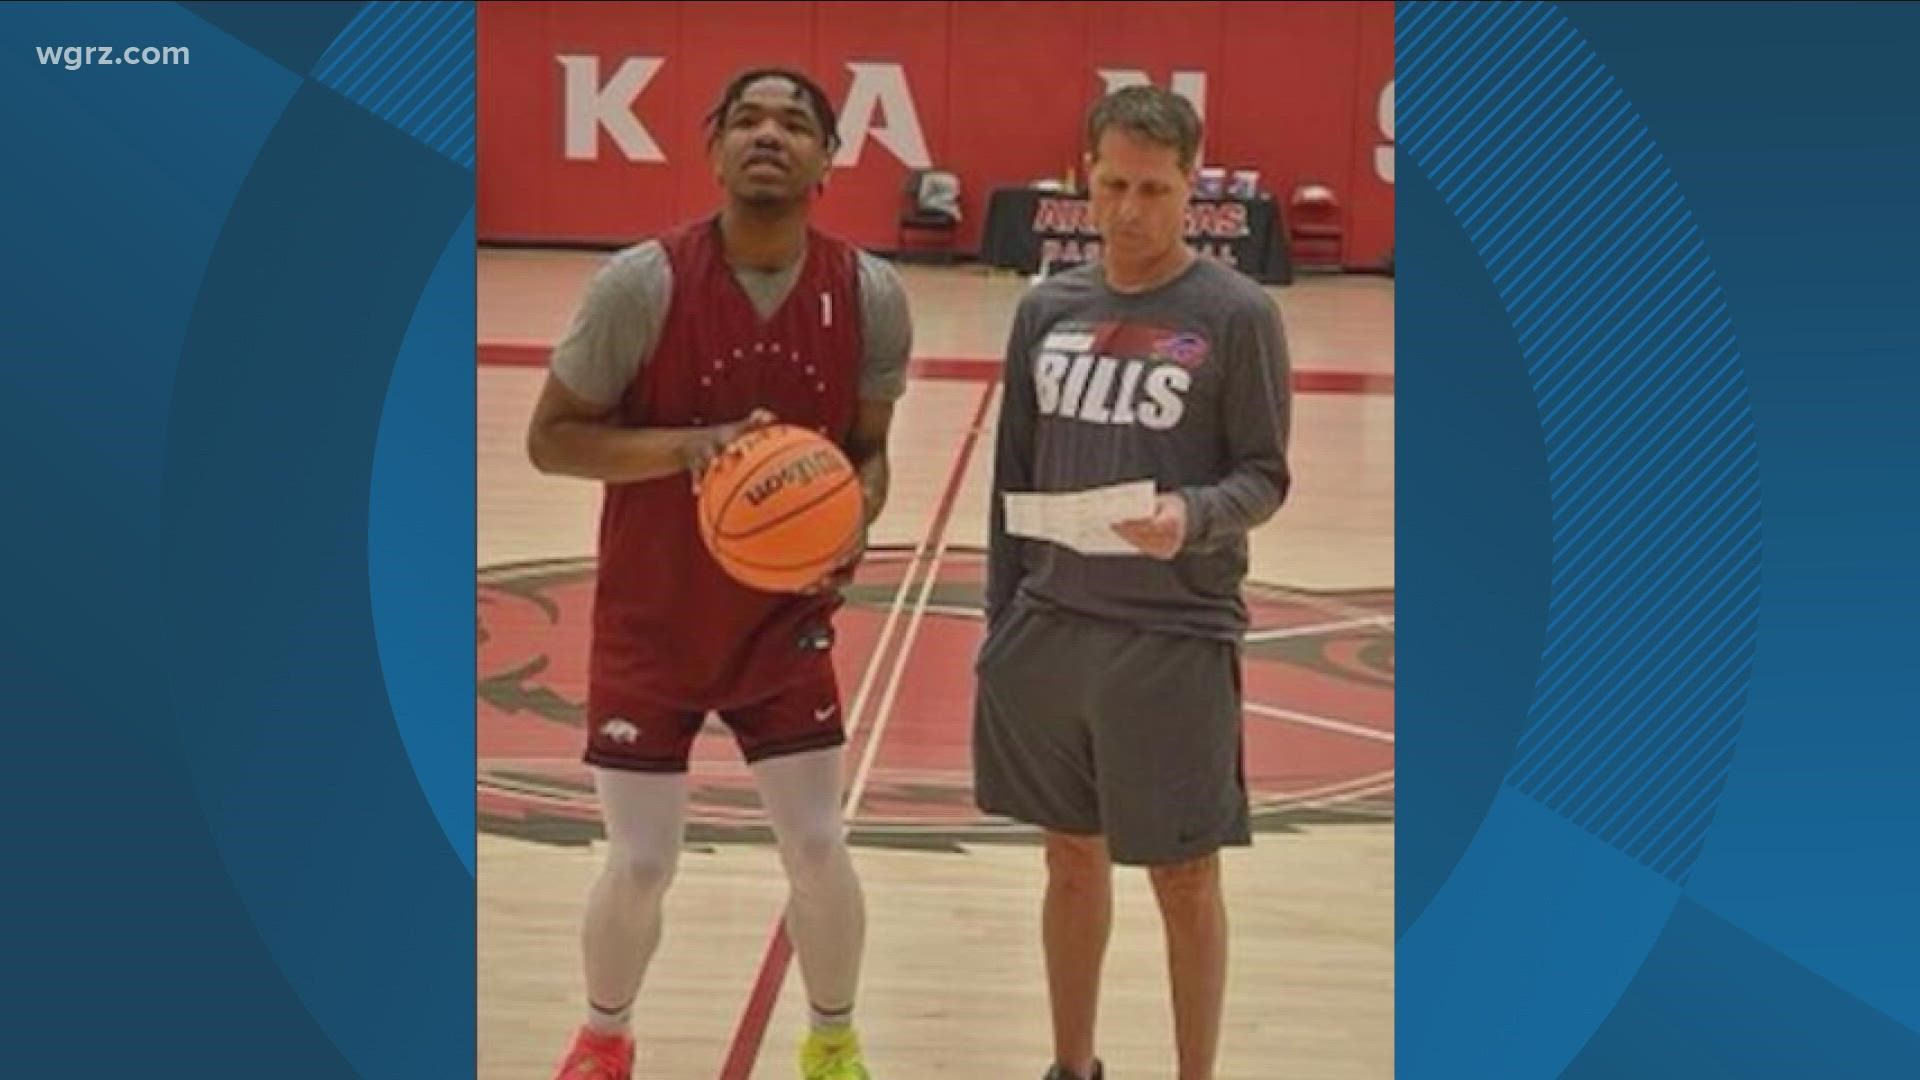 Arkansas head coach Eric Musselman seems to be born to coach a team here in Buffalo. He went viral this week after wearing a bunch of Buffalo sports gear